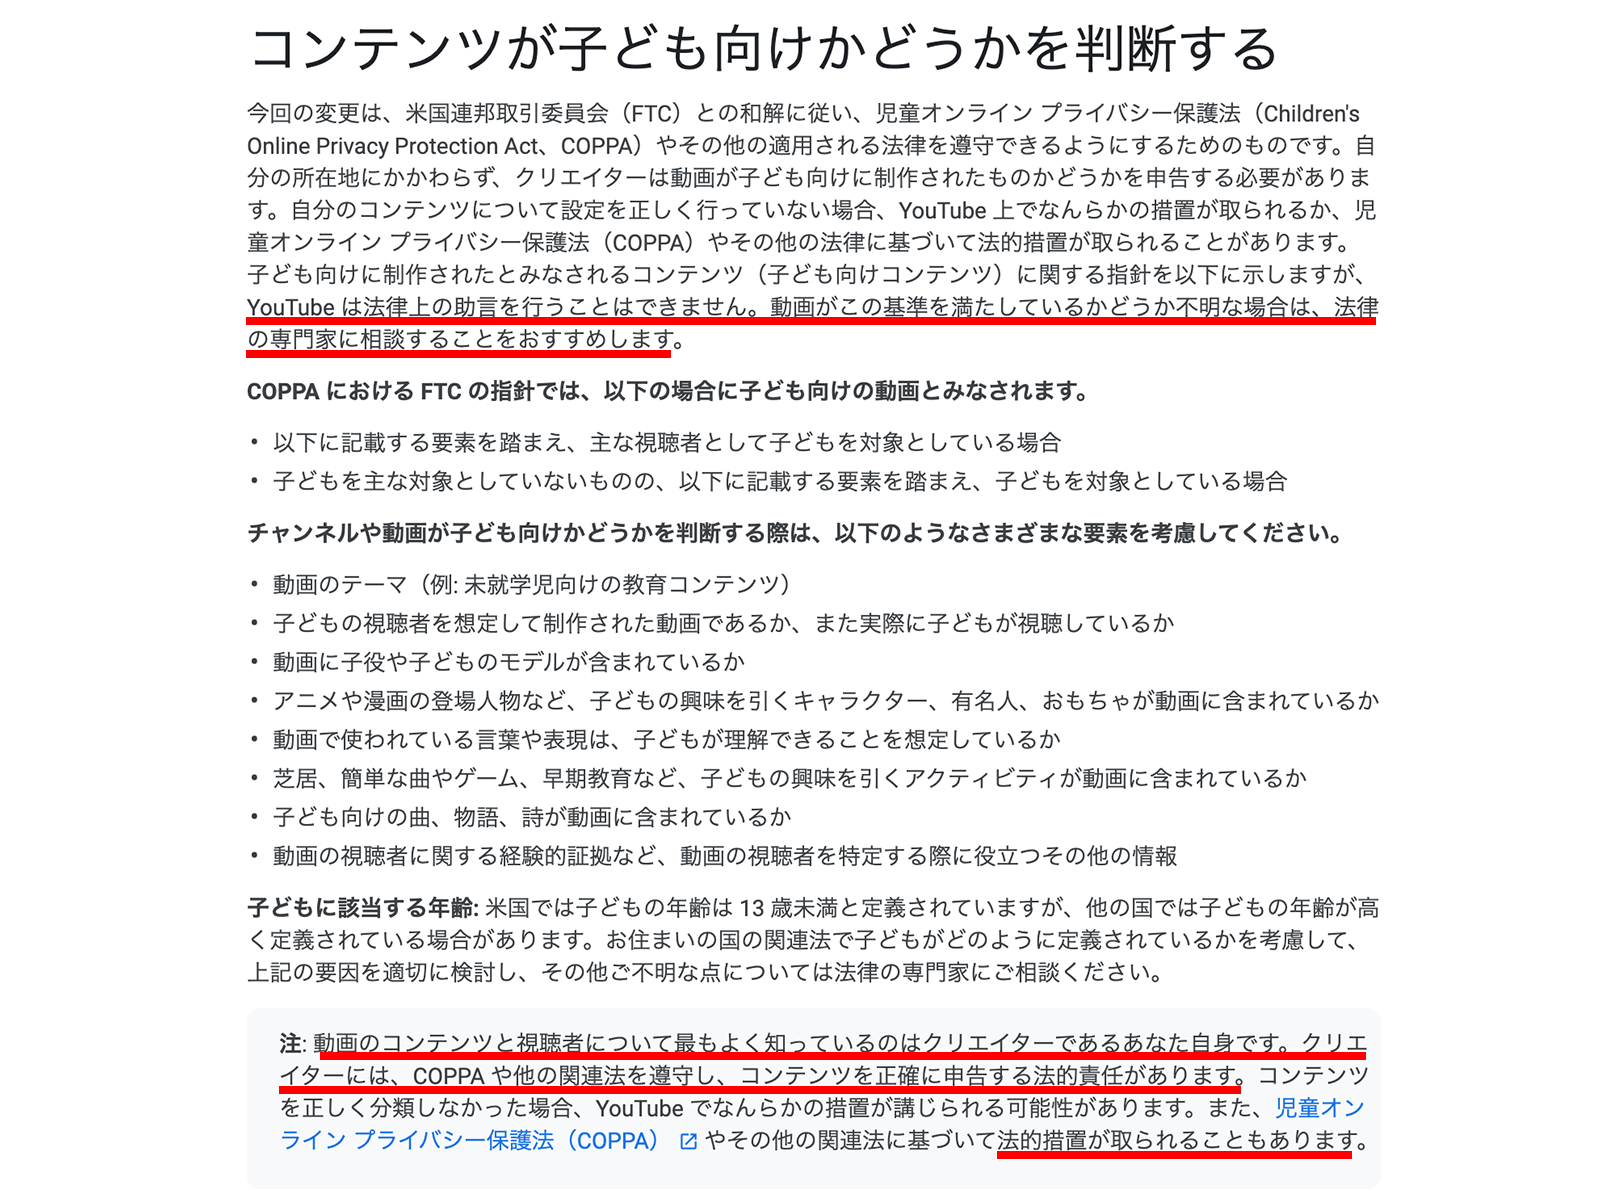 https://support.google.com/youtube/answer/9528076 2019年11月18日最終アクセス